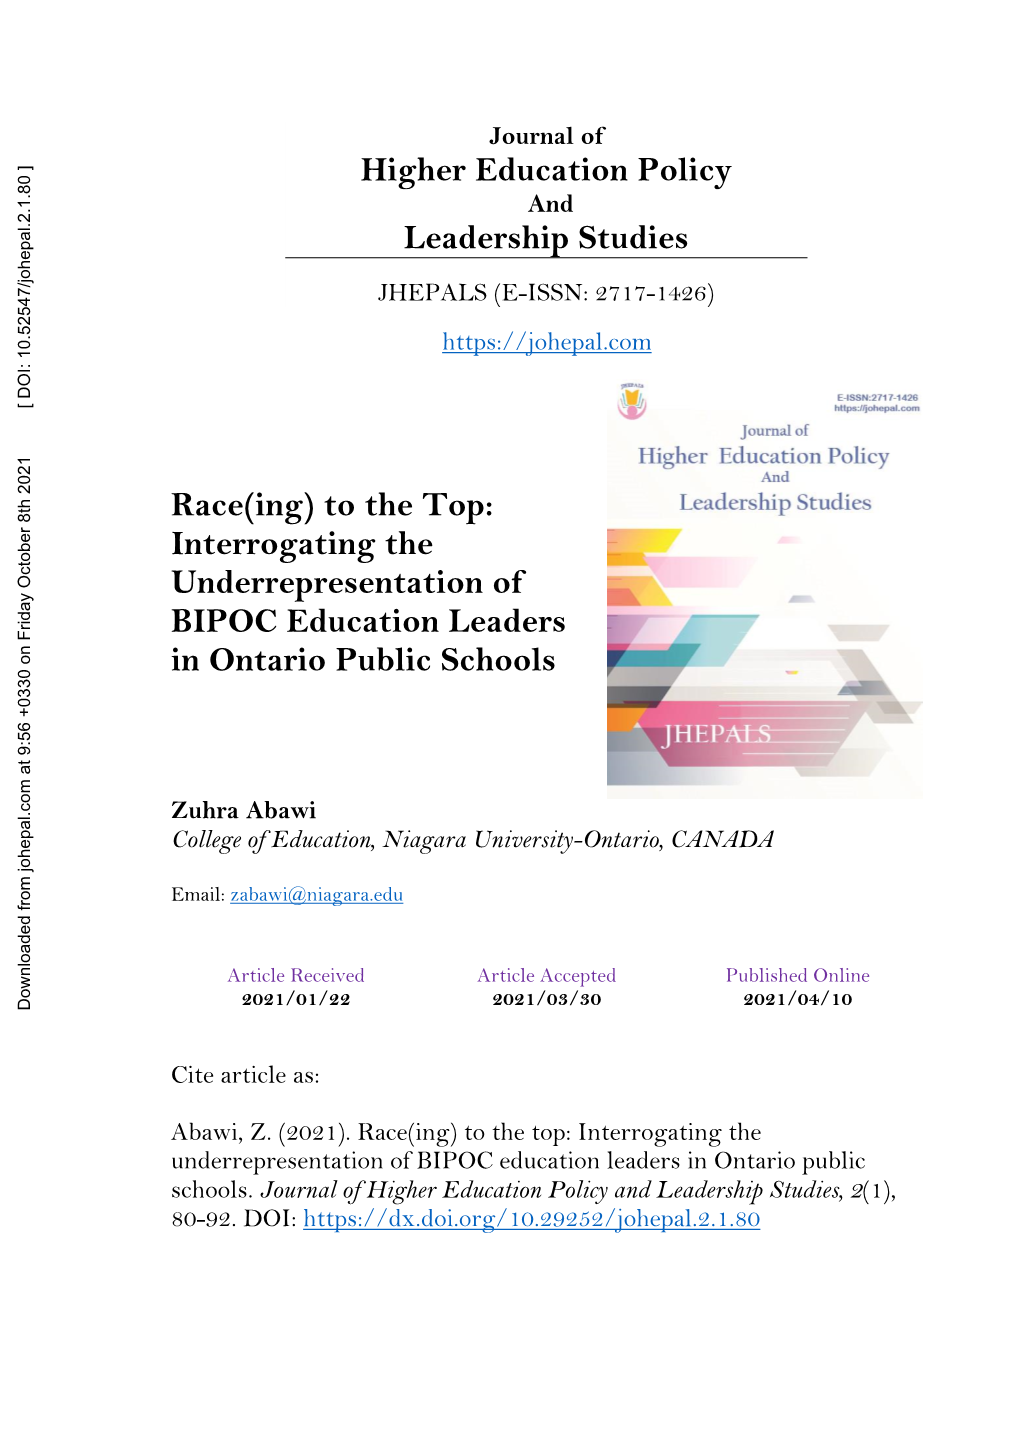 Race(Ing) to the Top: Interrogating the Underrepresentation of BIPOC Education Leaders in Ontario Public Schools